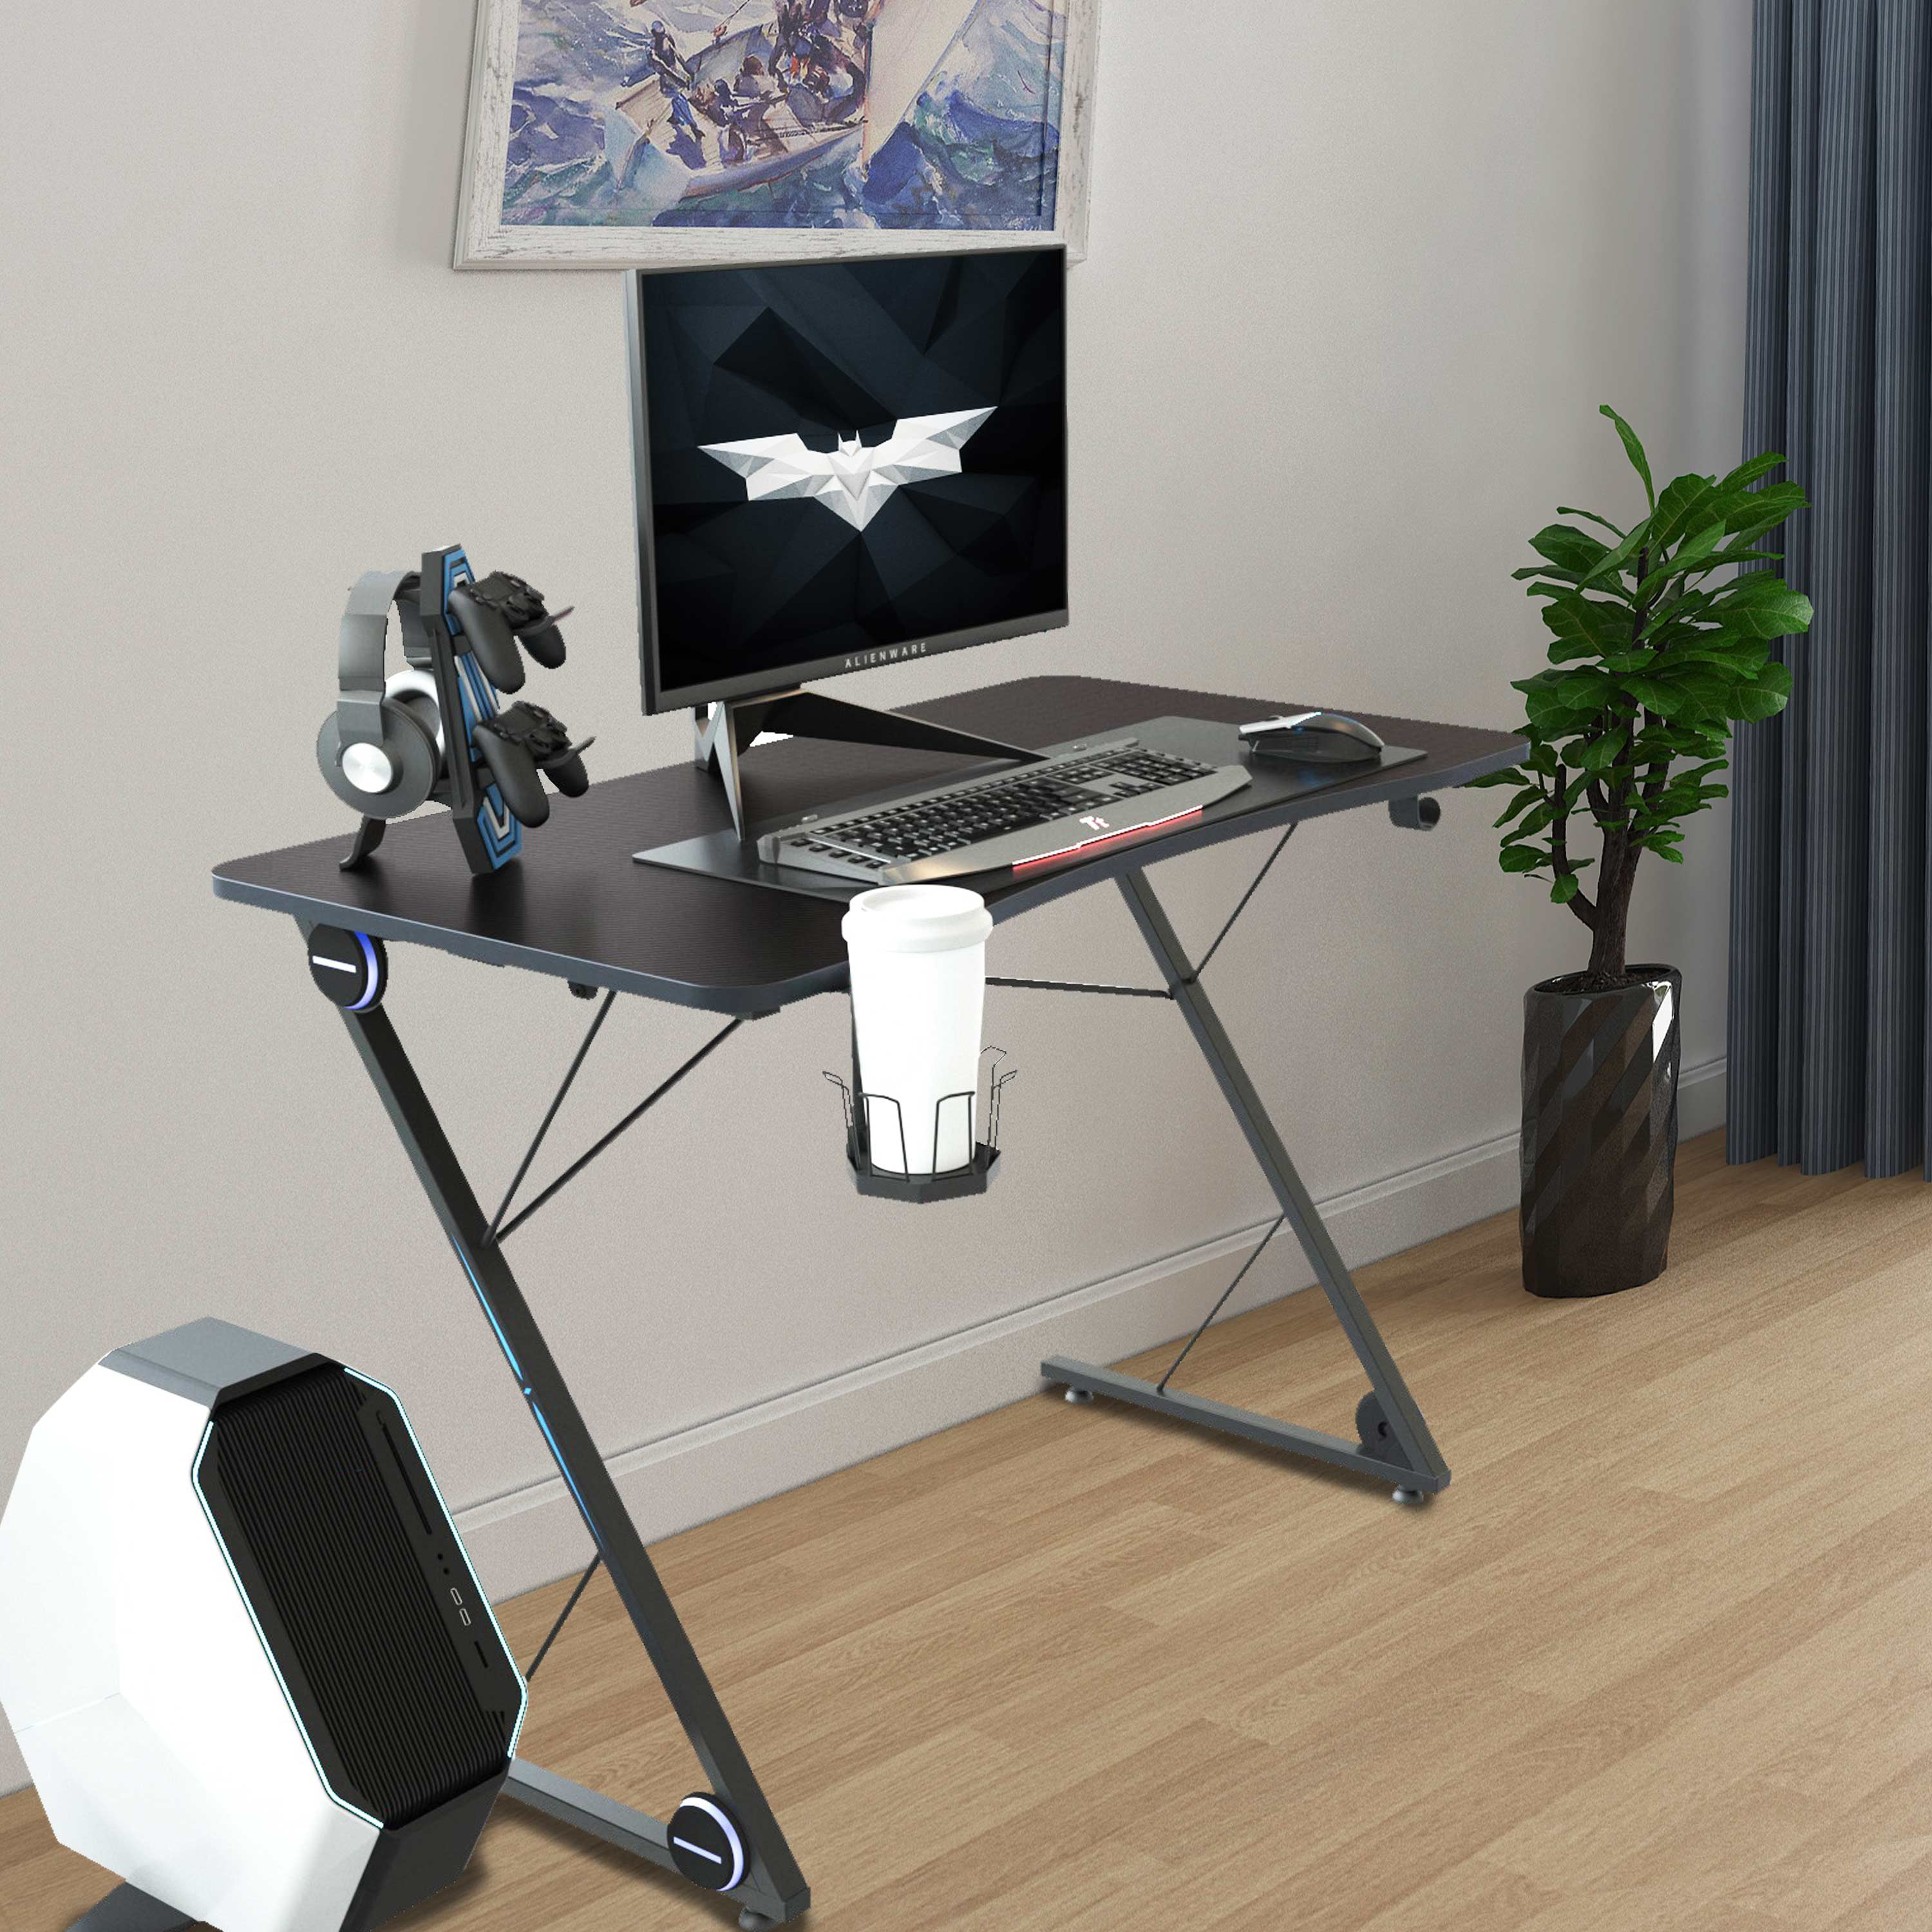 Details about   Ergonomic PC Computer Table Z-Shaped Gaming Desk With RGB LED Light Home Office 